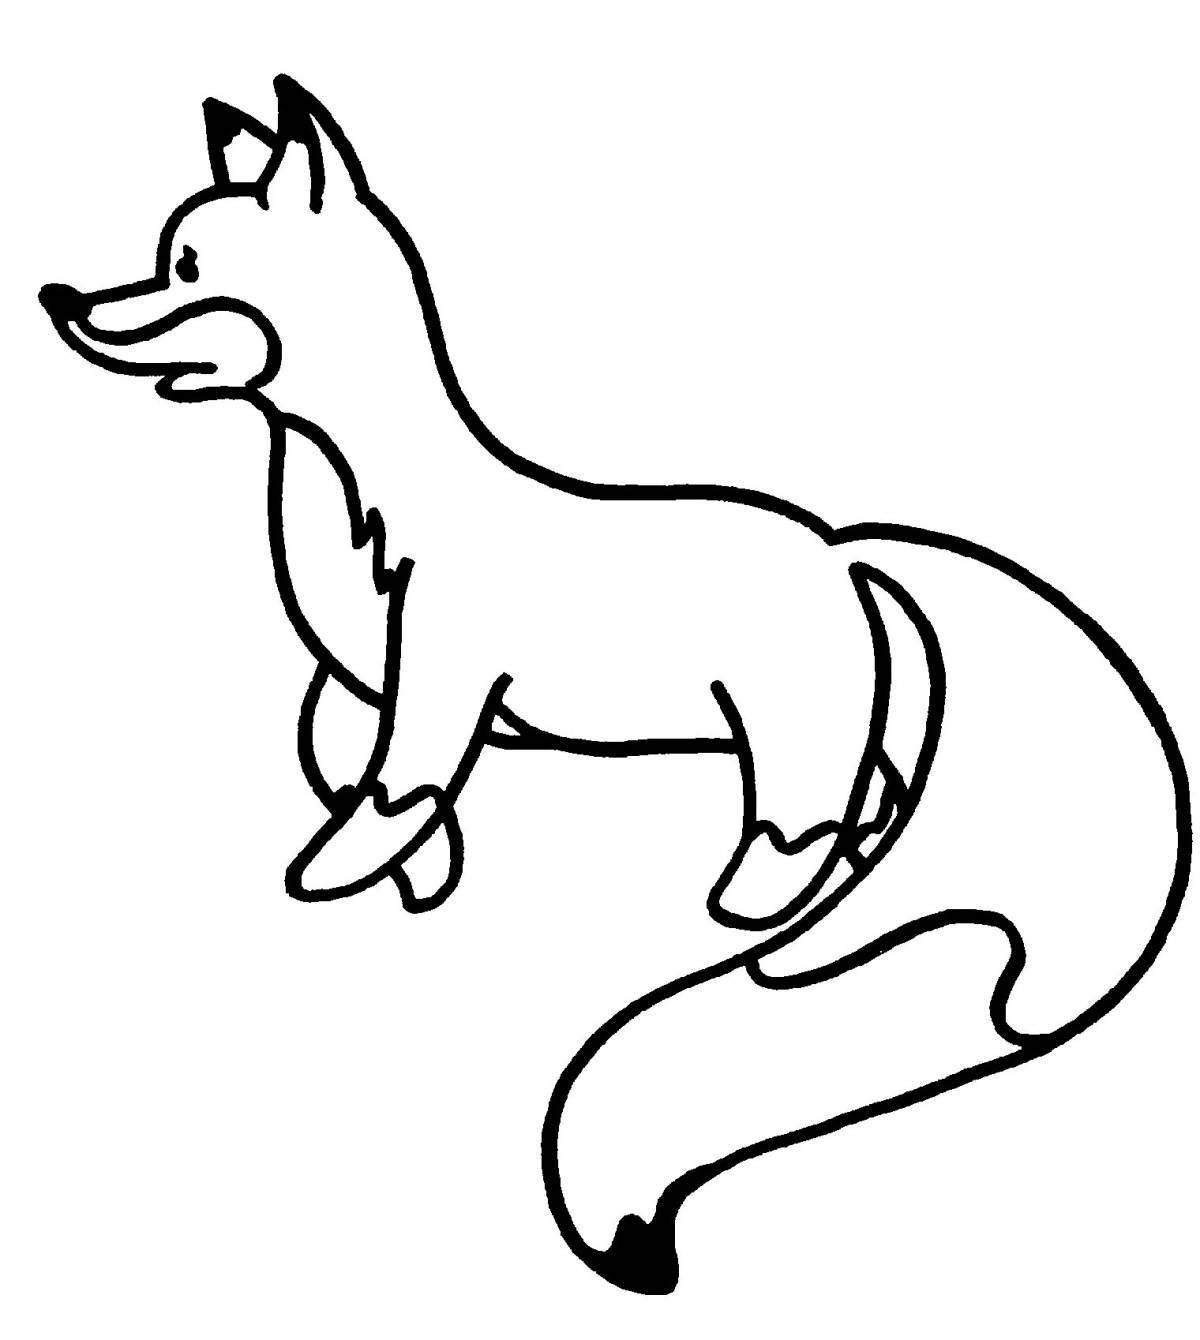 Coloring book magical fox for kids